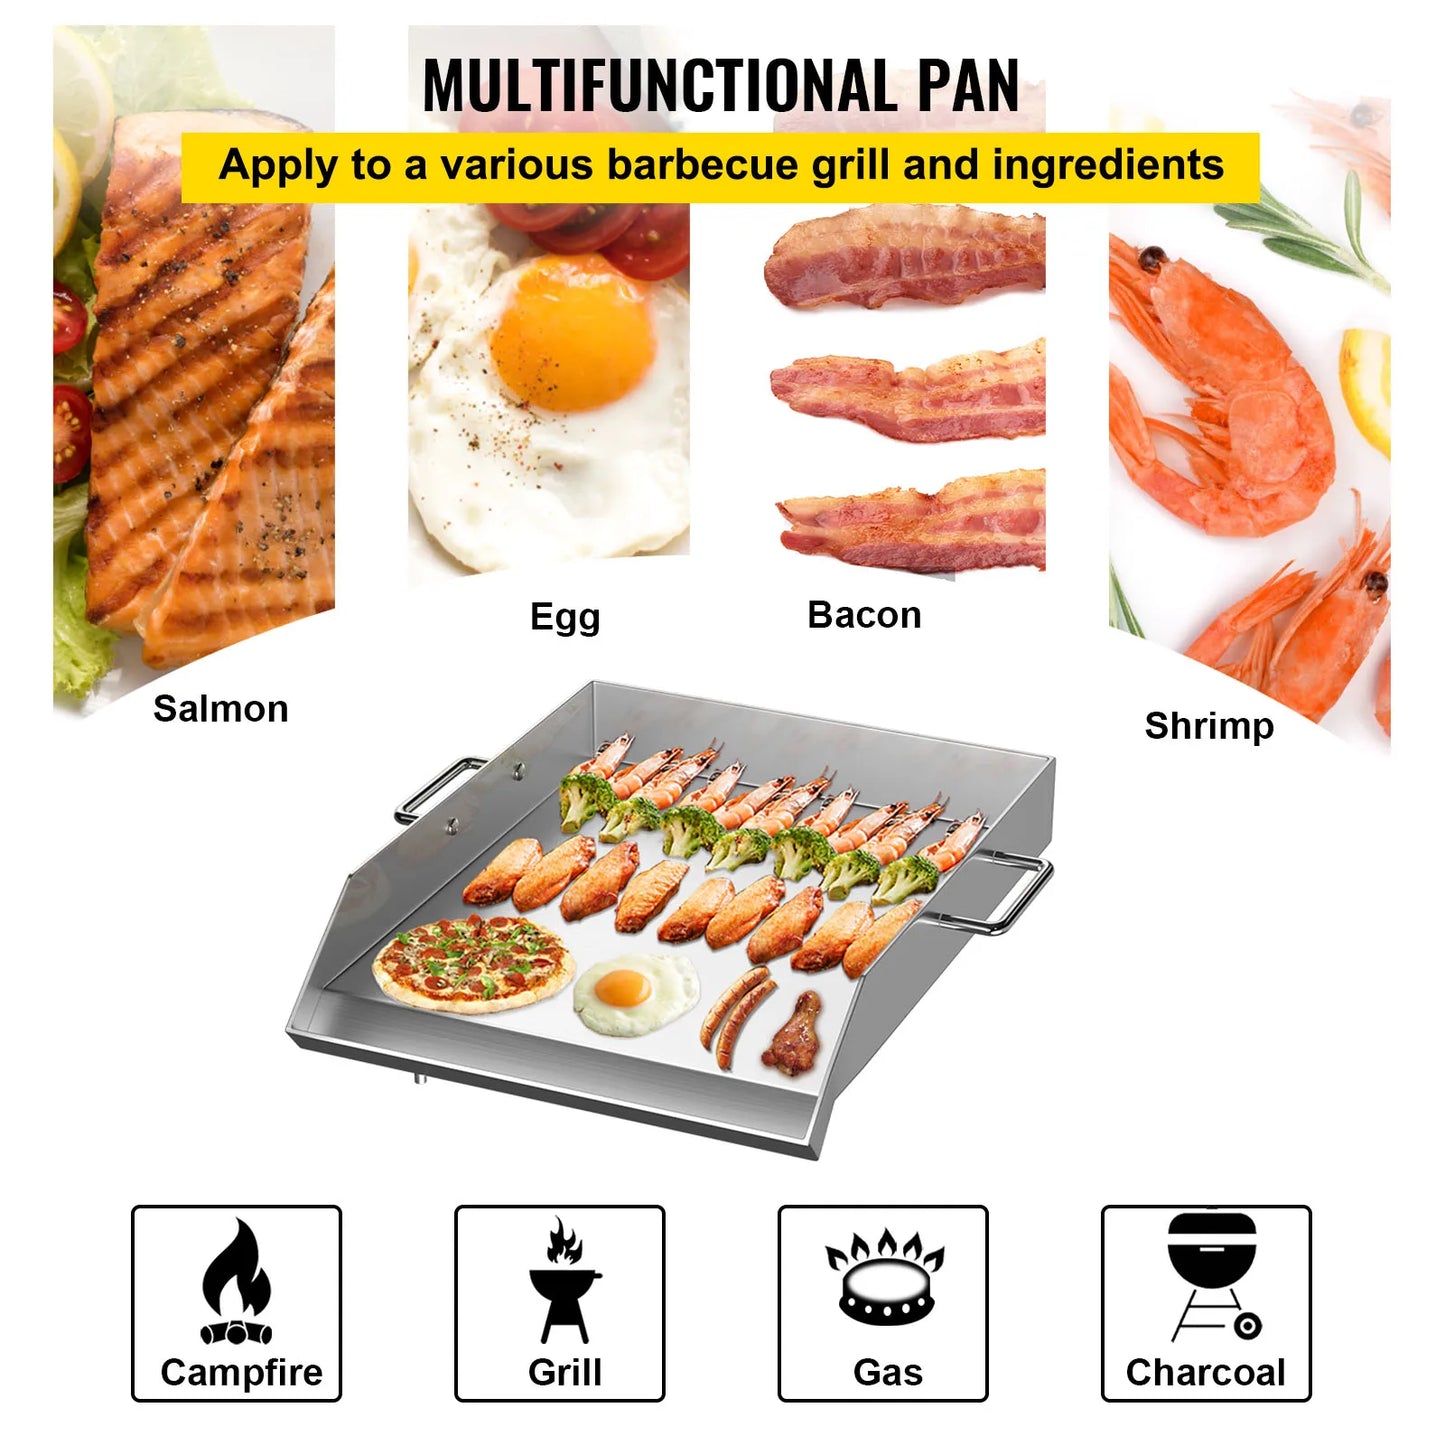 VEVOR Stainless Steel Griddle,18X16 In Universal Flat Top Rectangular Plate - My Store